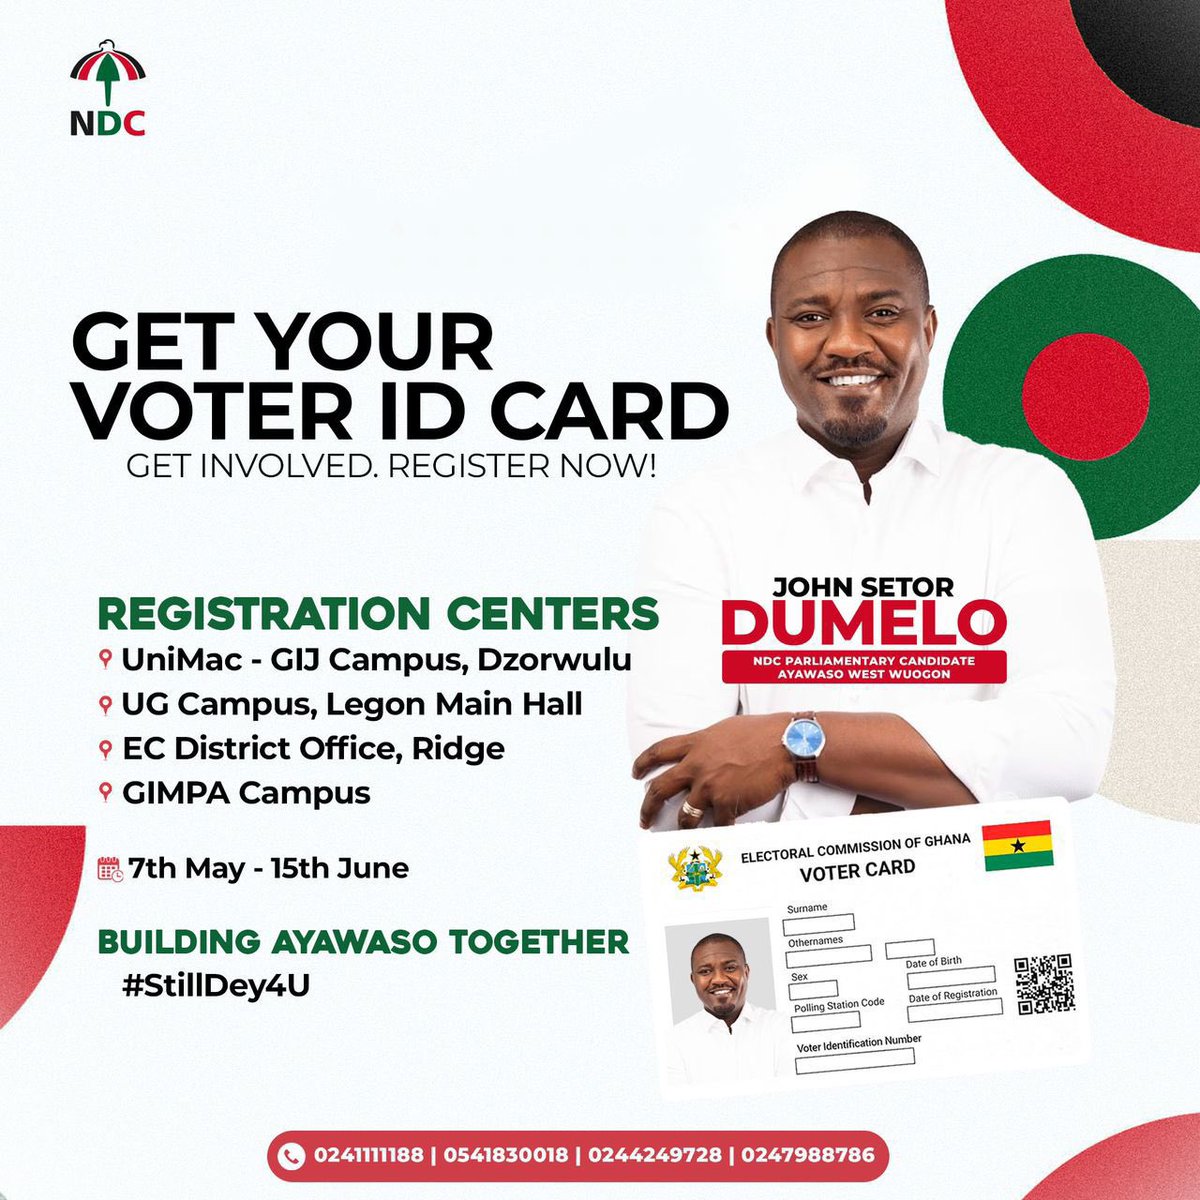 It’s time to get your voters ID card in Ayawaso West and vote on the 7th of December. Let’s make Ayawaso West great!!! #idey4u